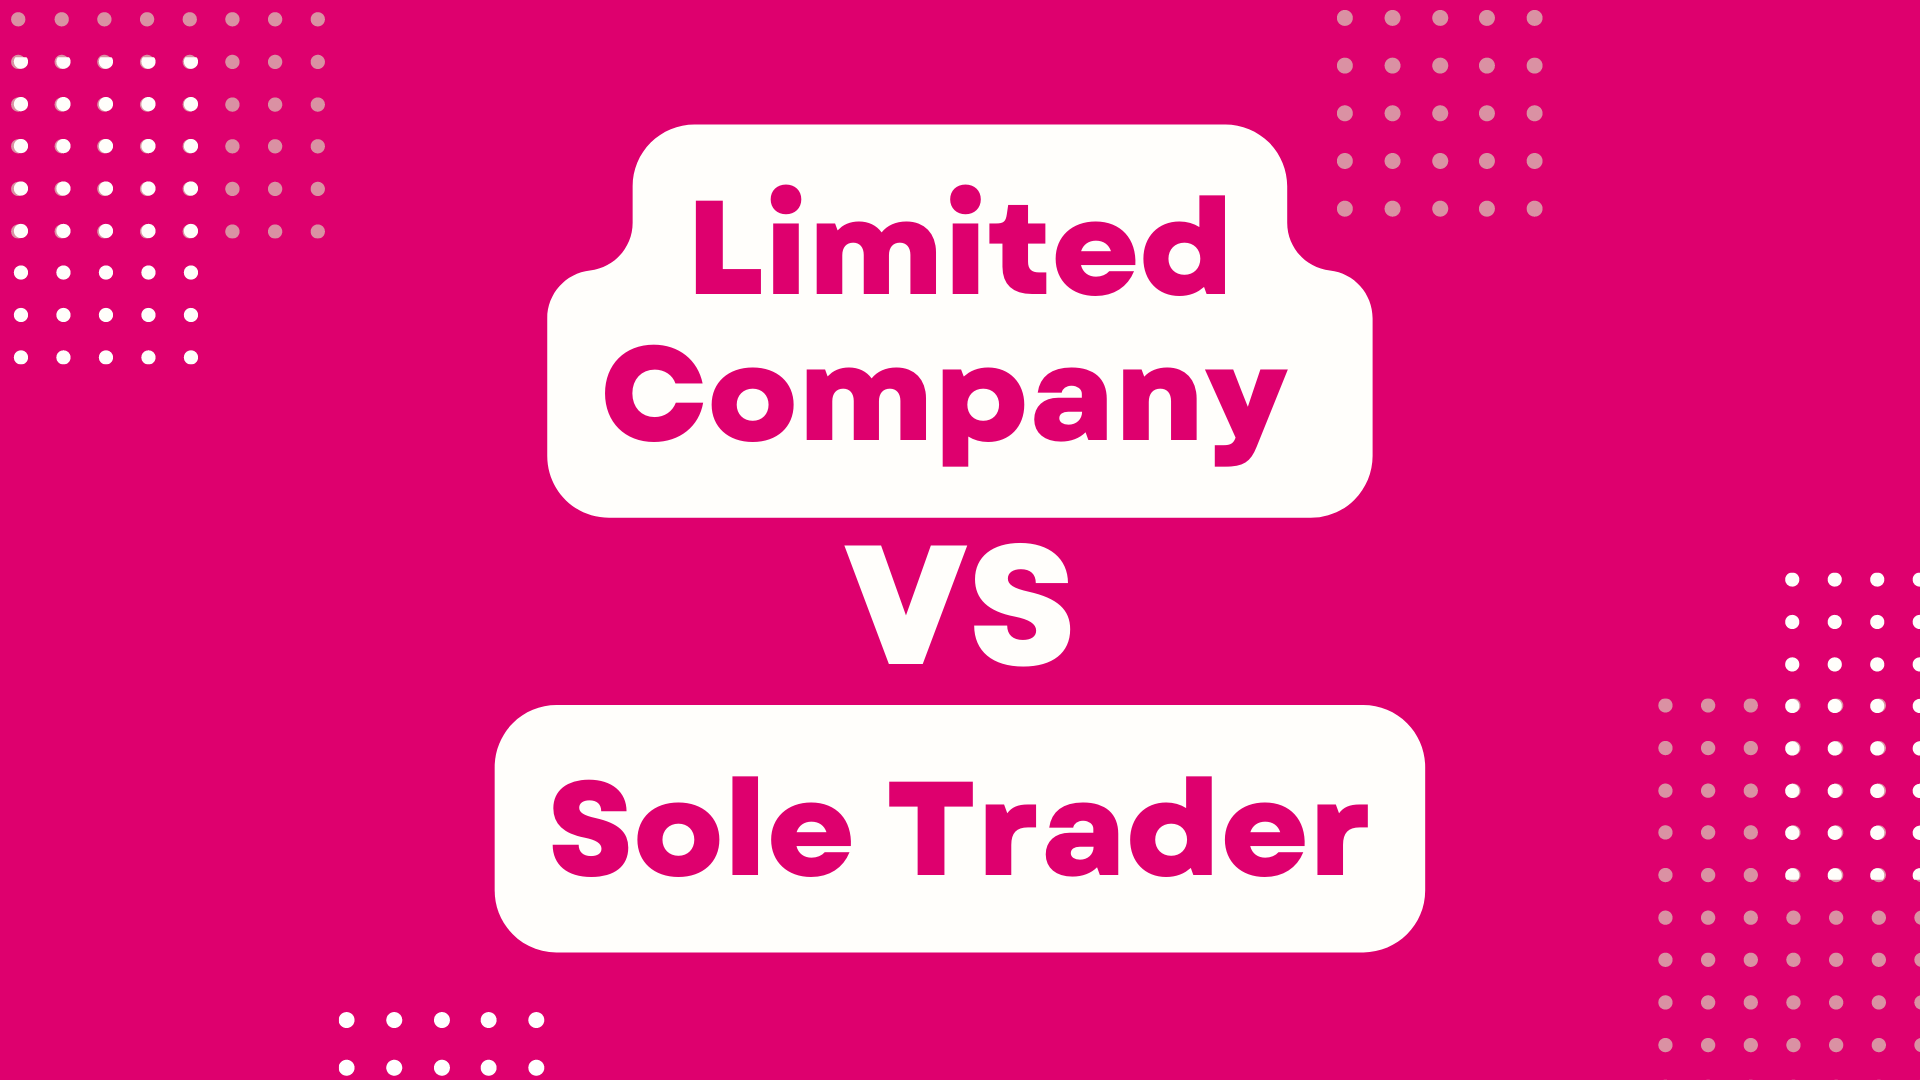 Sole Trader VS Limited Company: Which is better for you?